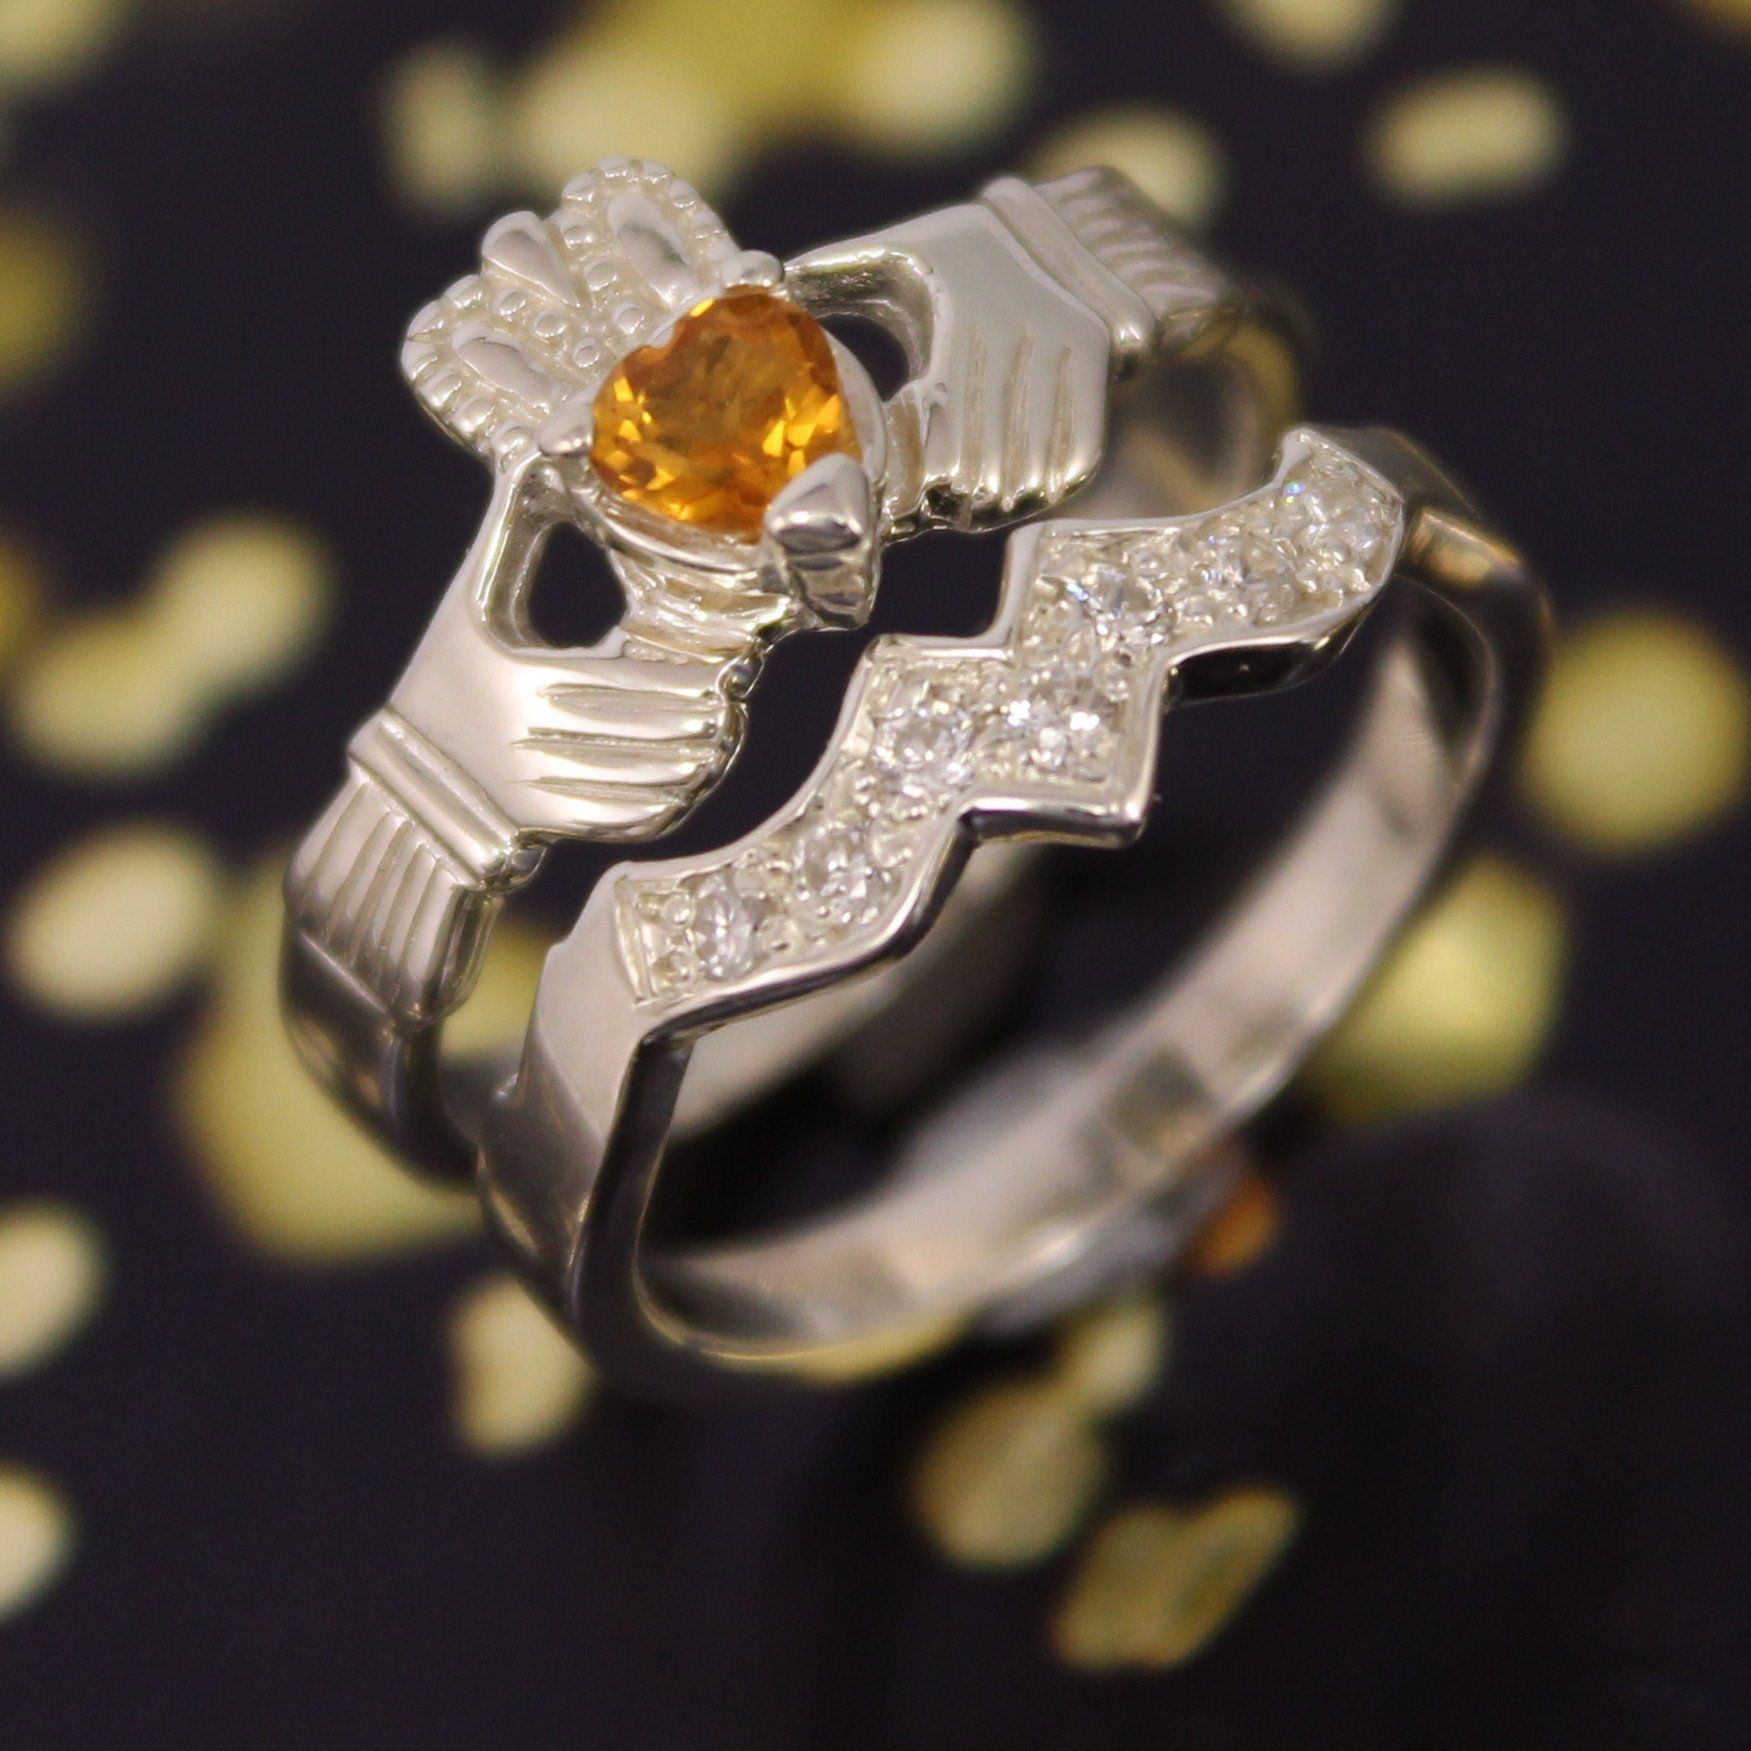 Jewelry - Real Citrine Gemstone Irish Claddagh Ring And Matching Band Set With Cubic Zirconia.